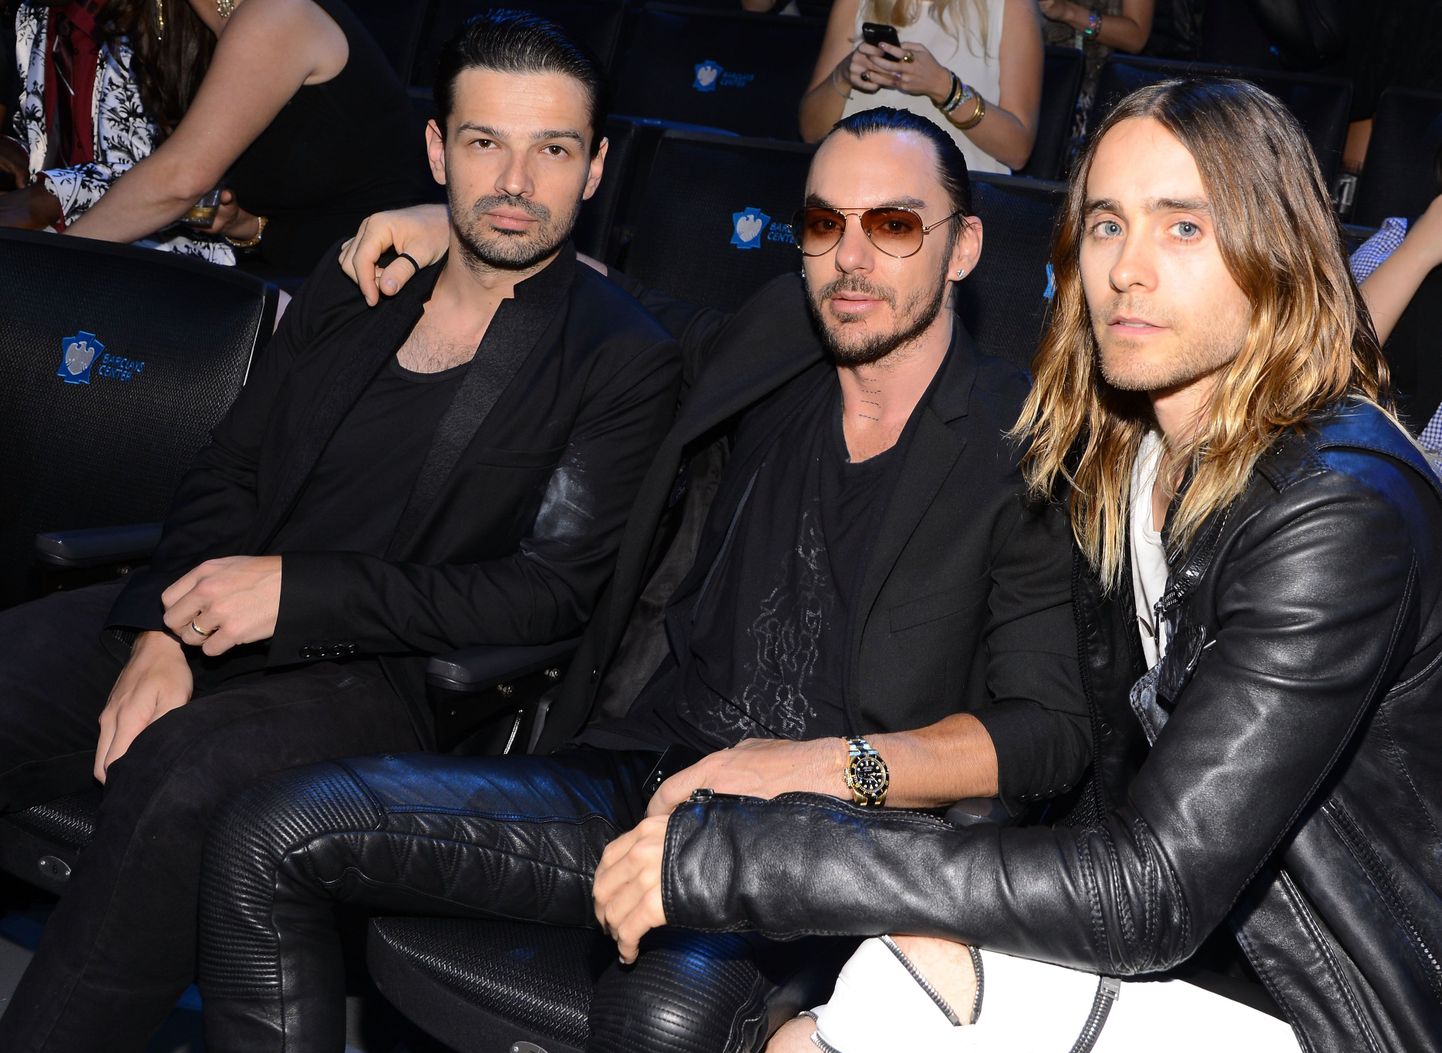 Thirty Seconds to Mars - Tomo Milicevic, Shannon Leto, Jared Leto